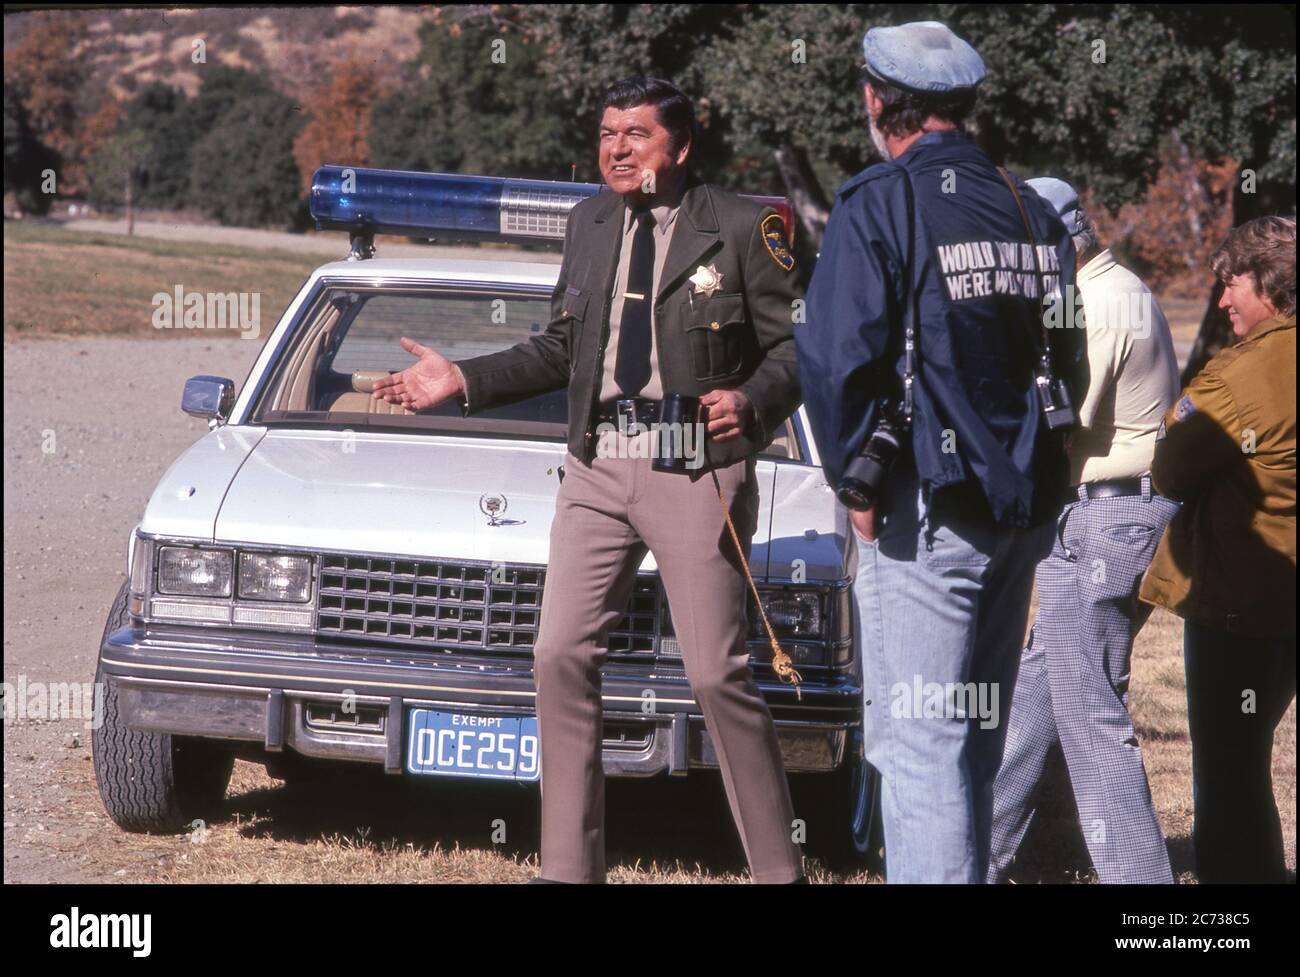 Actor Claude Akins as Sheriff Lobo on the set of the television